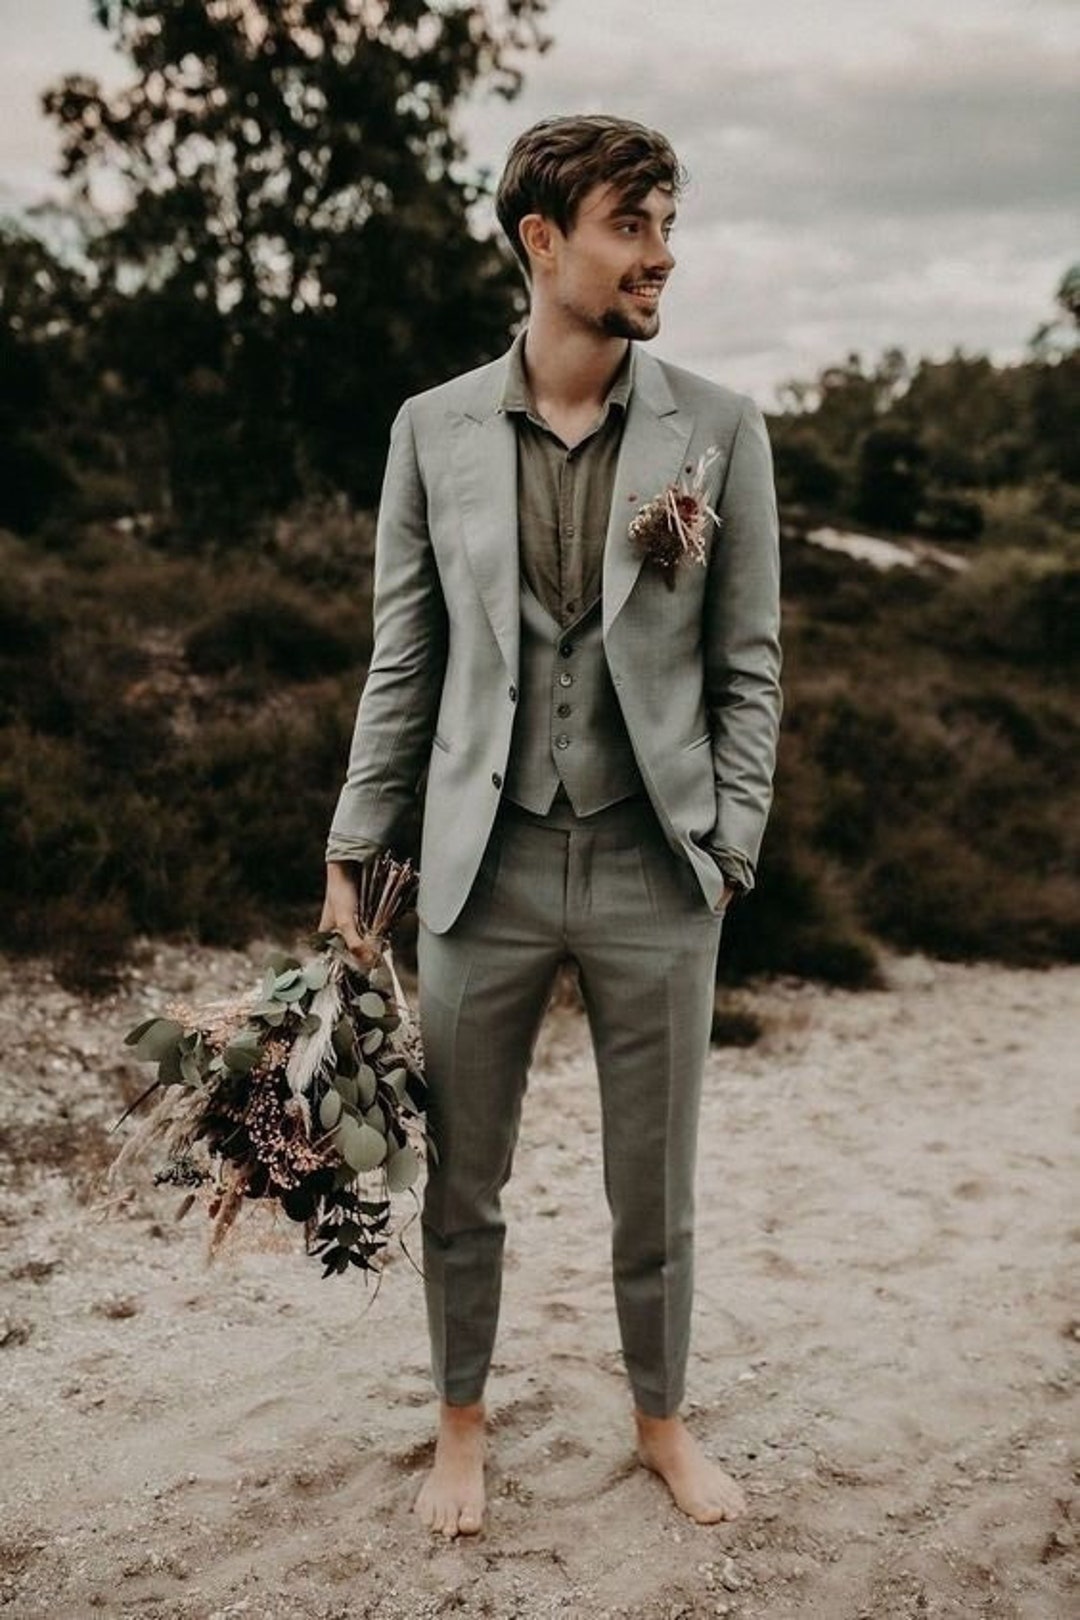 Mix and Match Groom and Groomsmen coat and pants for a modern